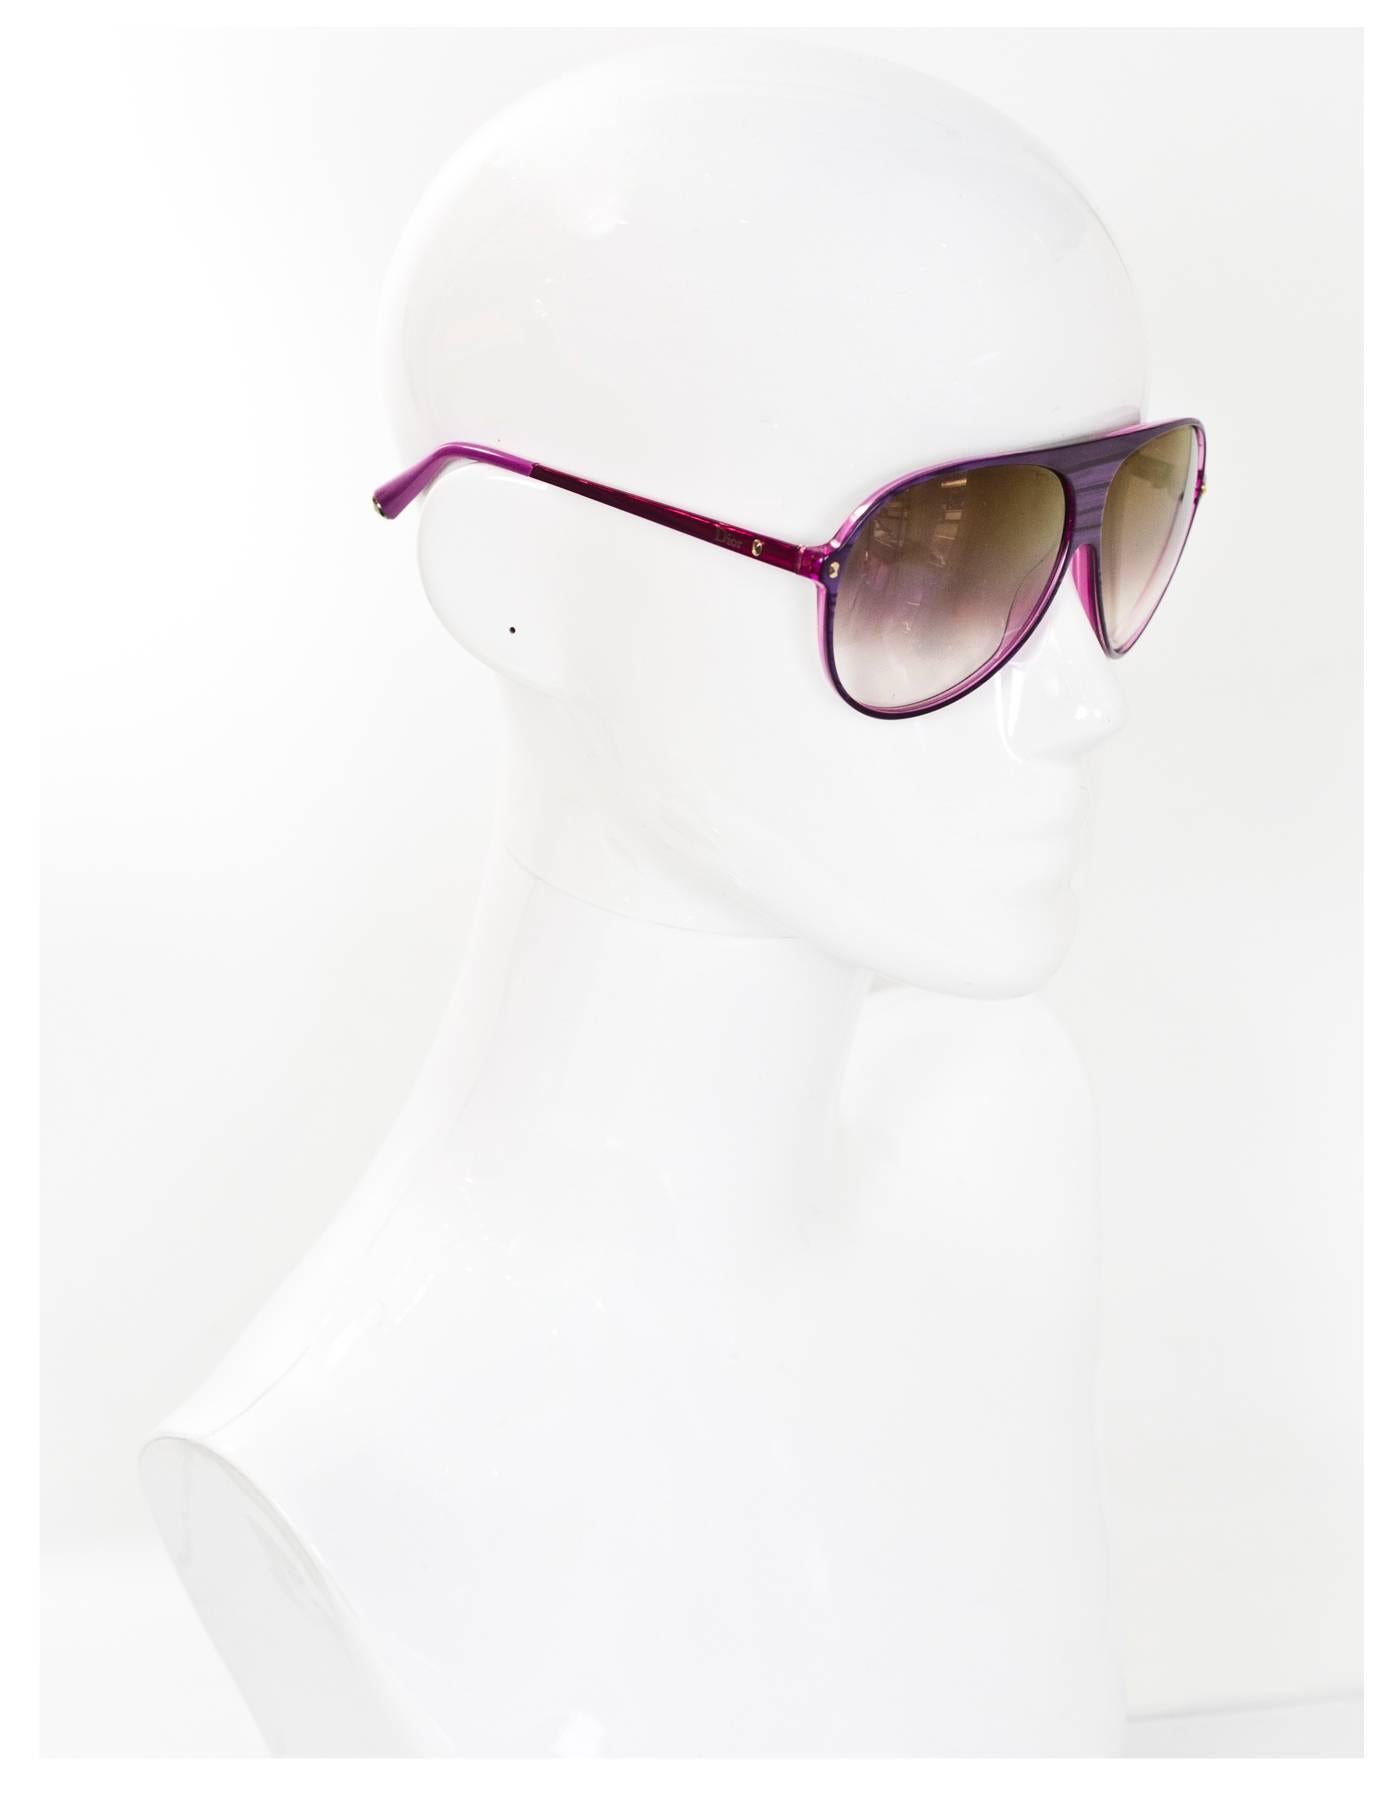 Christian Dior Purple Les Marquises Aviator Sunglasses

 Made In: Italy
Color: Purple
Materials: Metal, resin
Overall Condition: Excellent pre-owned condition, minor surface marks at lenses
Includes: Christian Dior glasses case, dust cloth